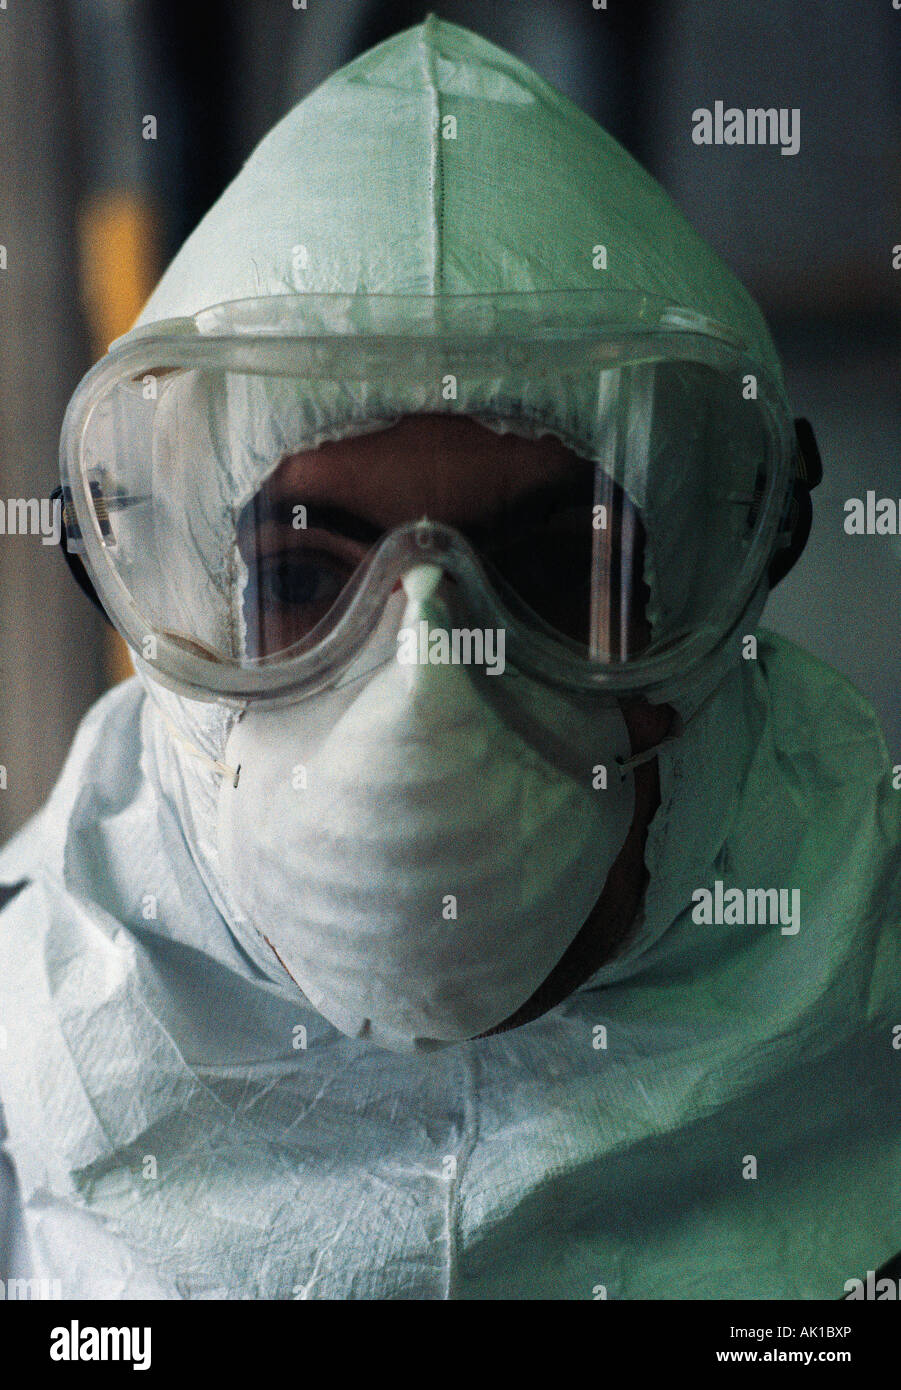 Industry, Manufacturing, Paint production, Man in protective clothing. Stock Photo